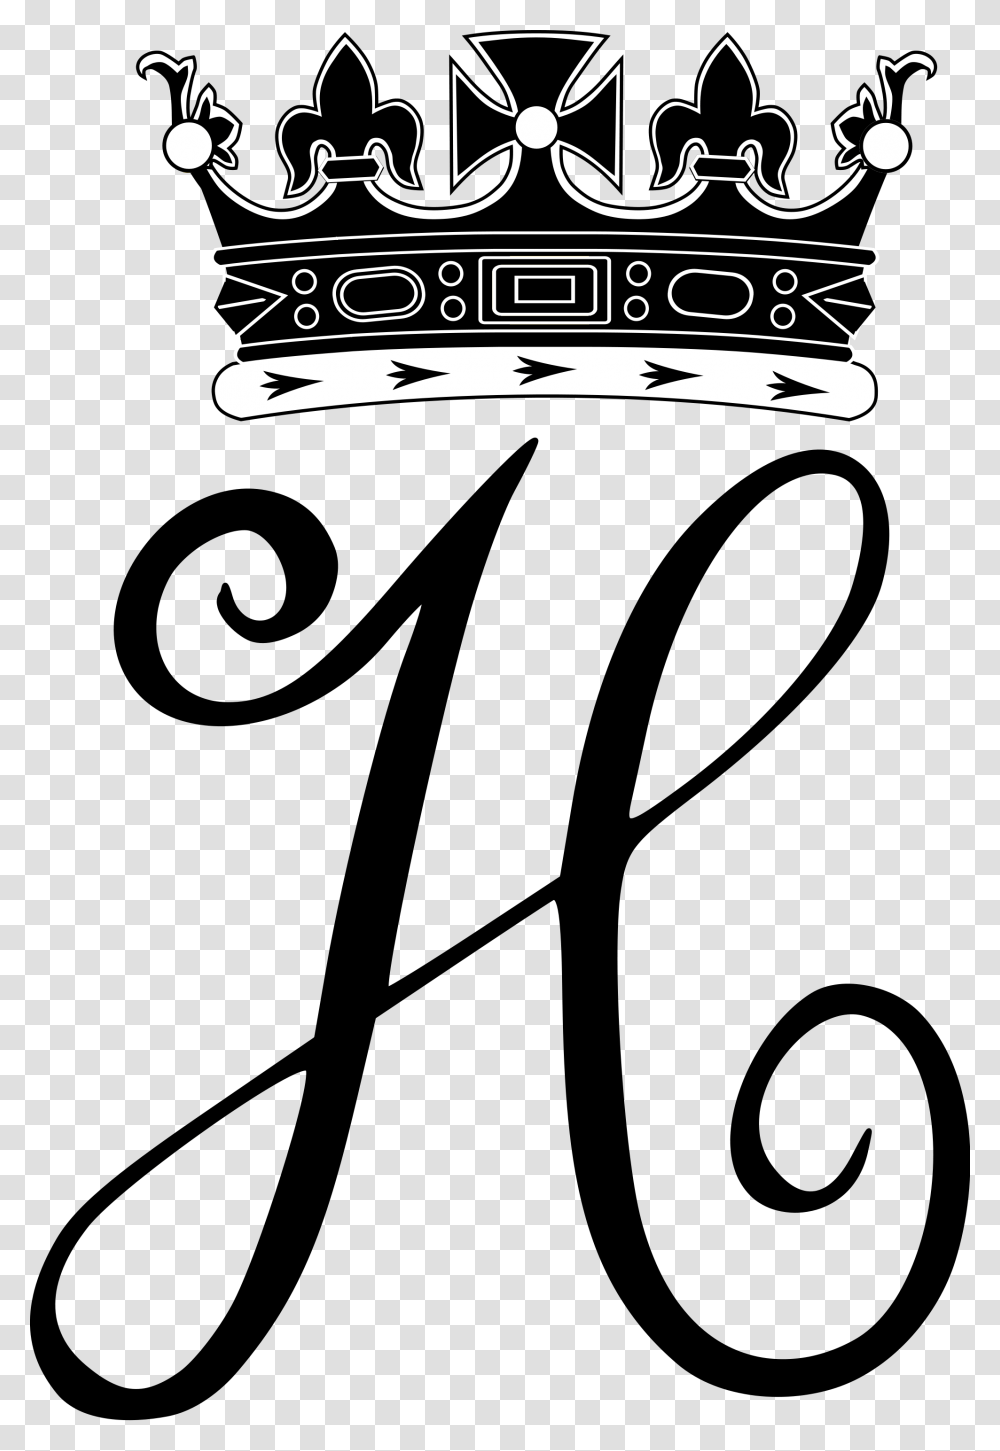 Duke And Duchess Clipart Black And White Clip Art Black Meghan And Harry Monogram, Outdoors, Nature Transparent Png